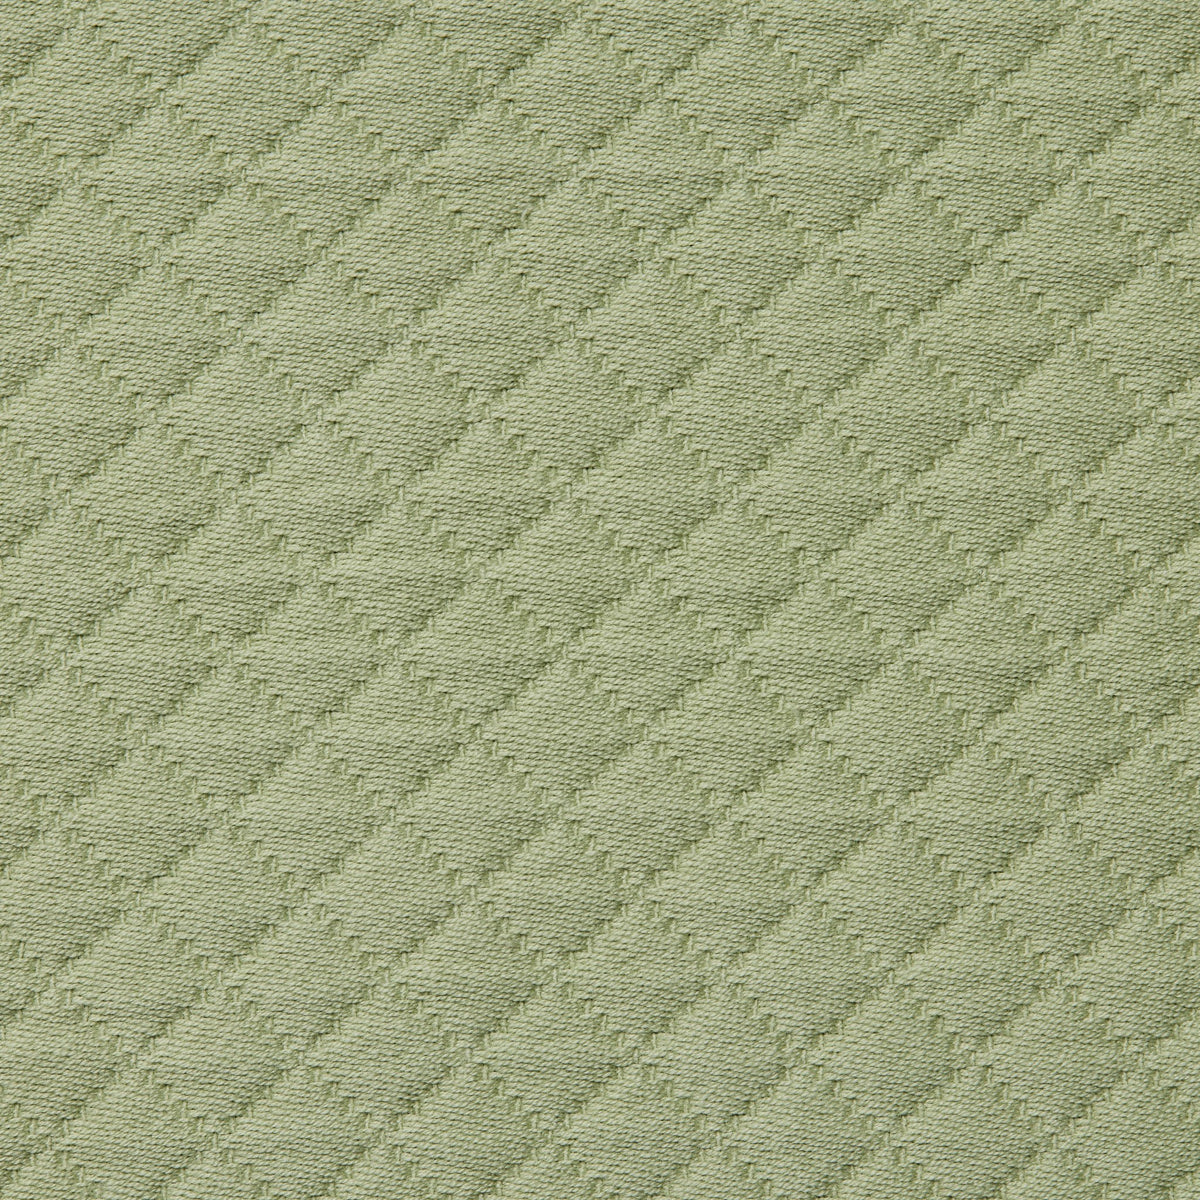 Swatch Sample of Sferra Rombo Coverlet and Shams Willow